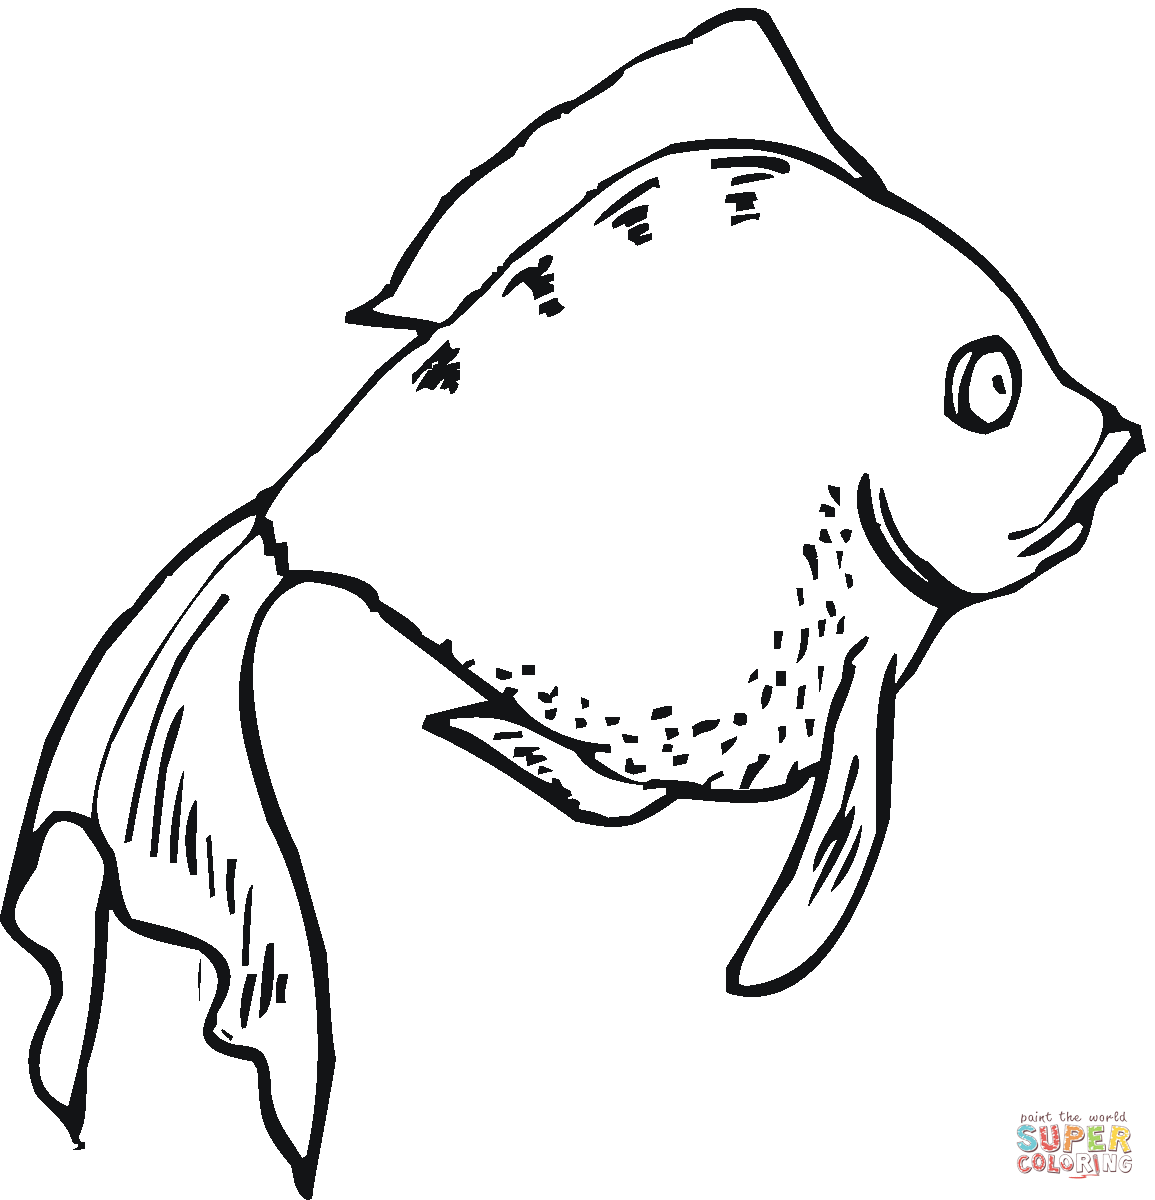 Goldfish 17 coloring page | Free Printable Coloring Pages